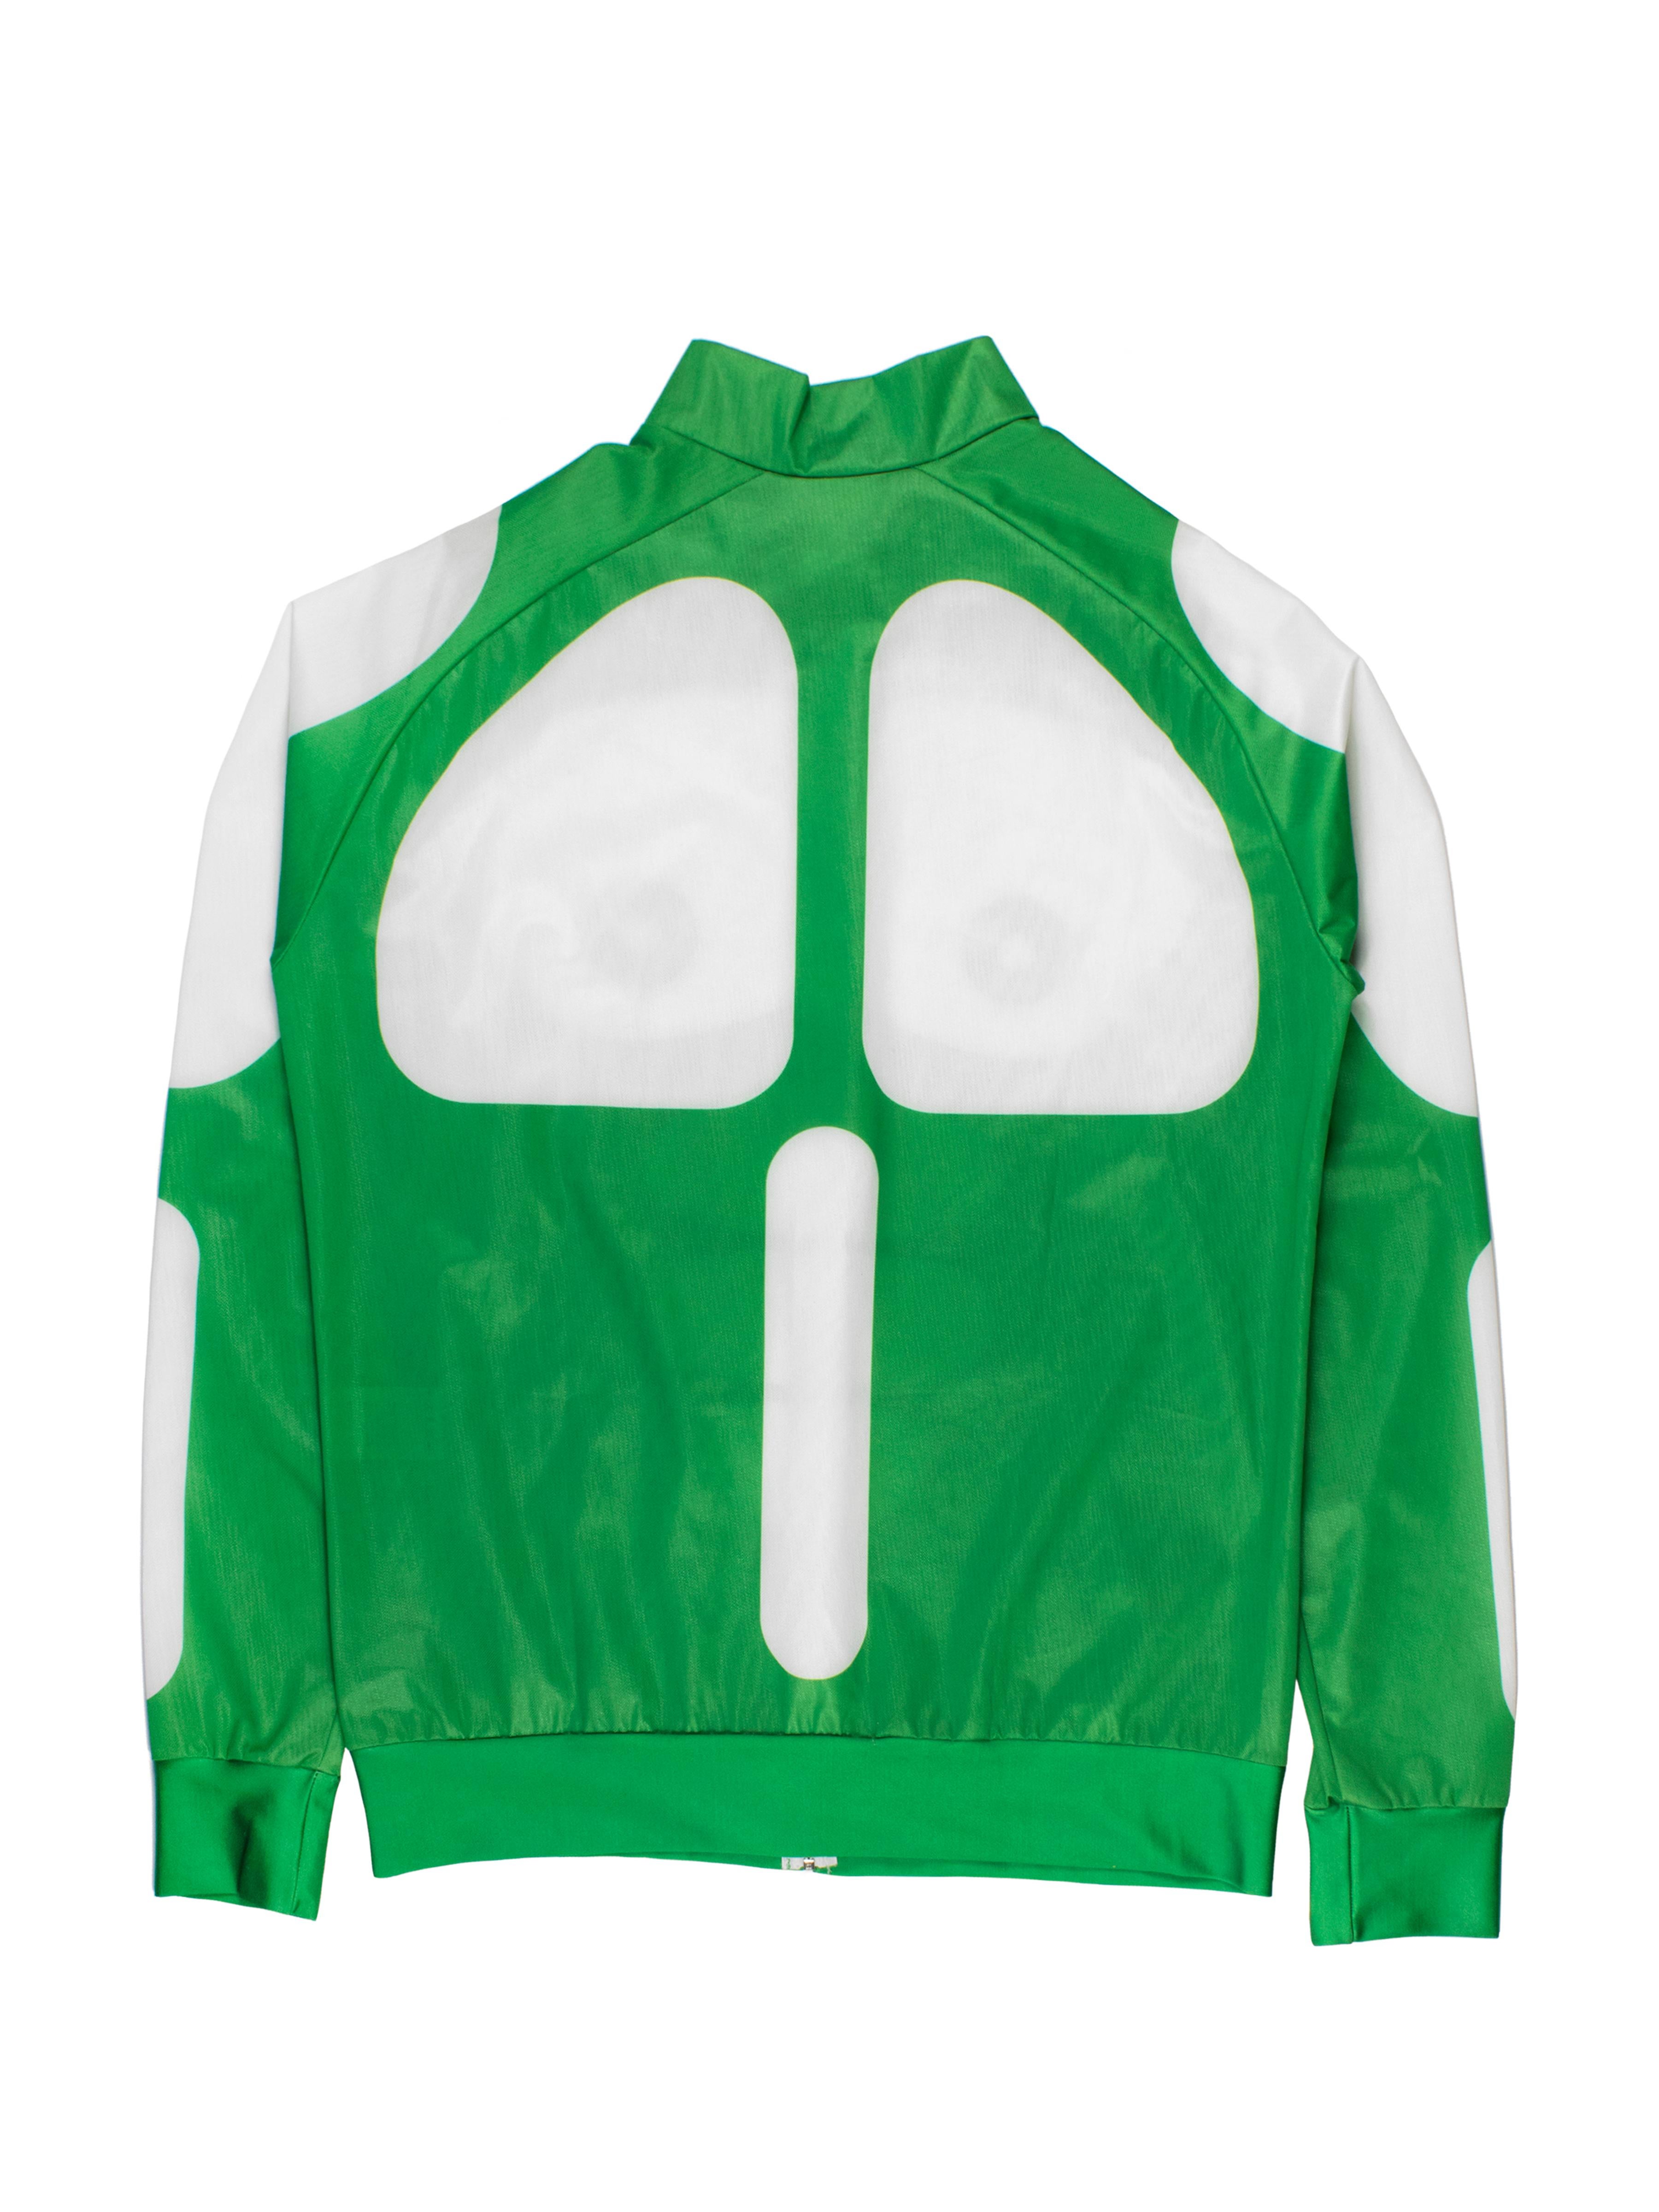 Walter Van Beirendonck SS2009 Muscle Track Jacket In Good Condition In Beverly Hills, CA